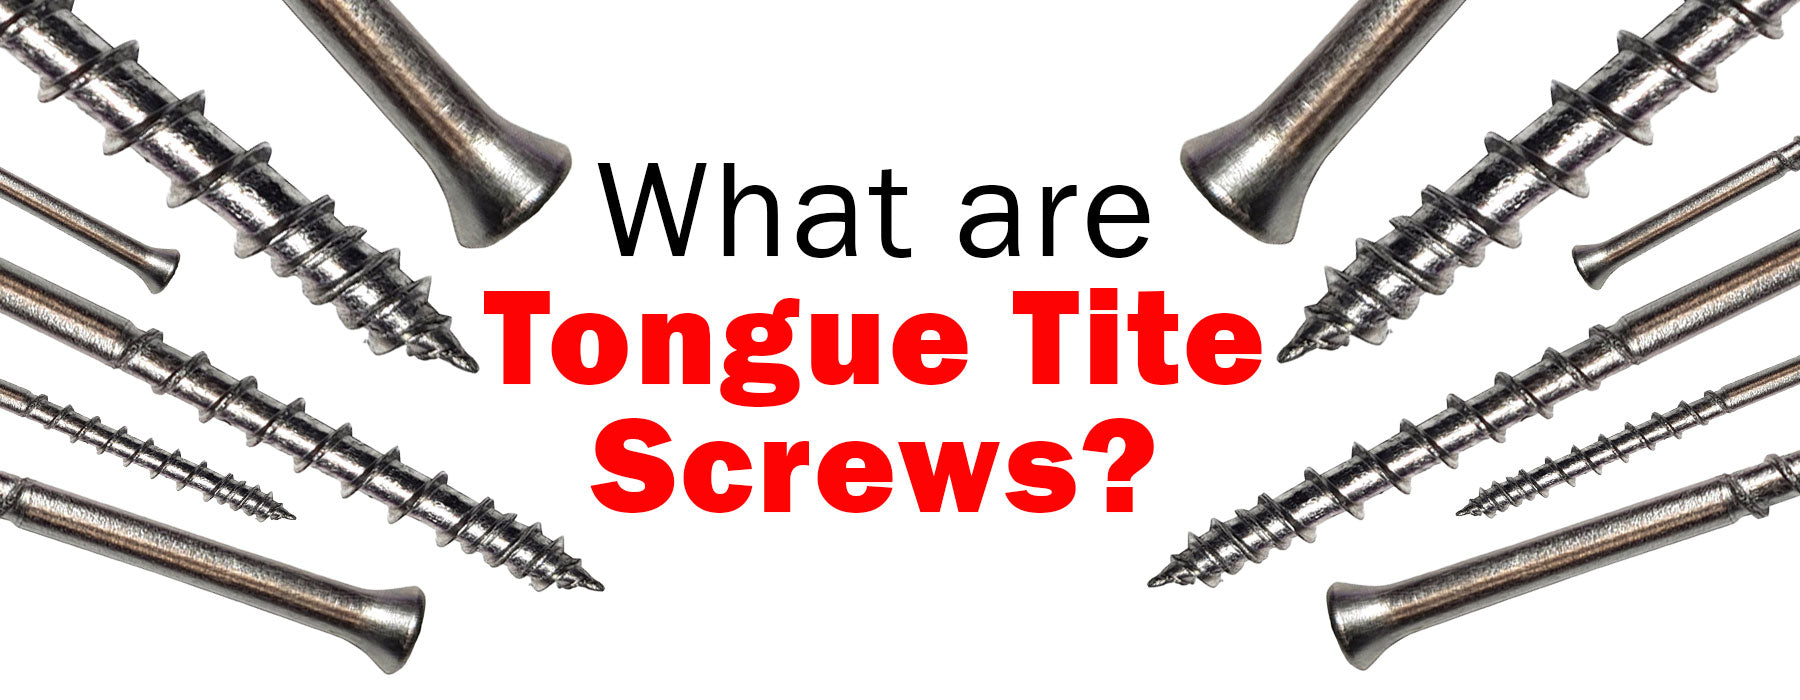 Tongue Tite screws from Fusion Fixings. What are Tongue Tite Screws and where to buy them